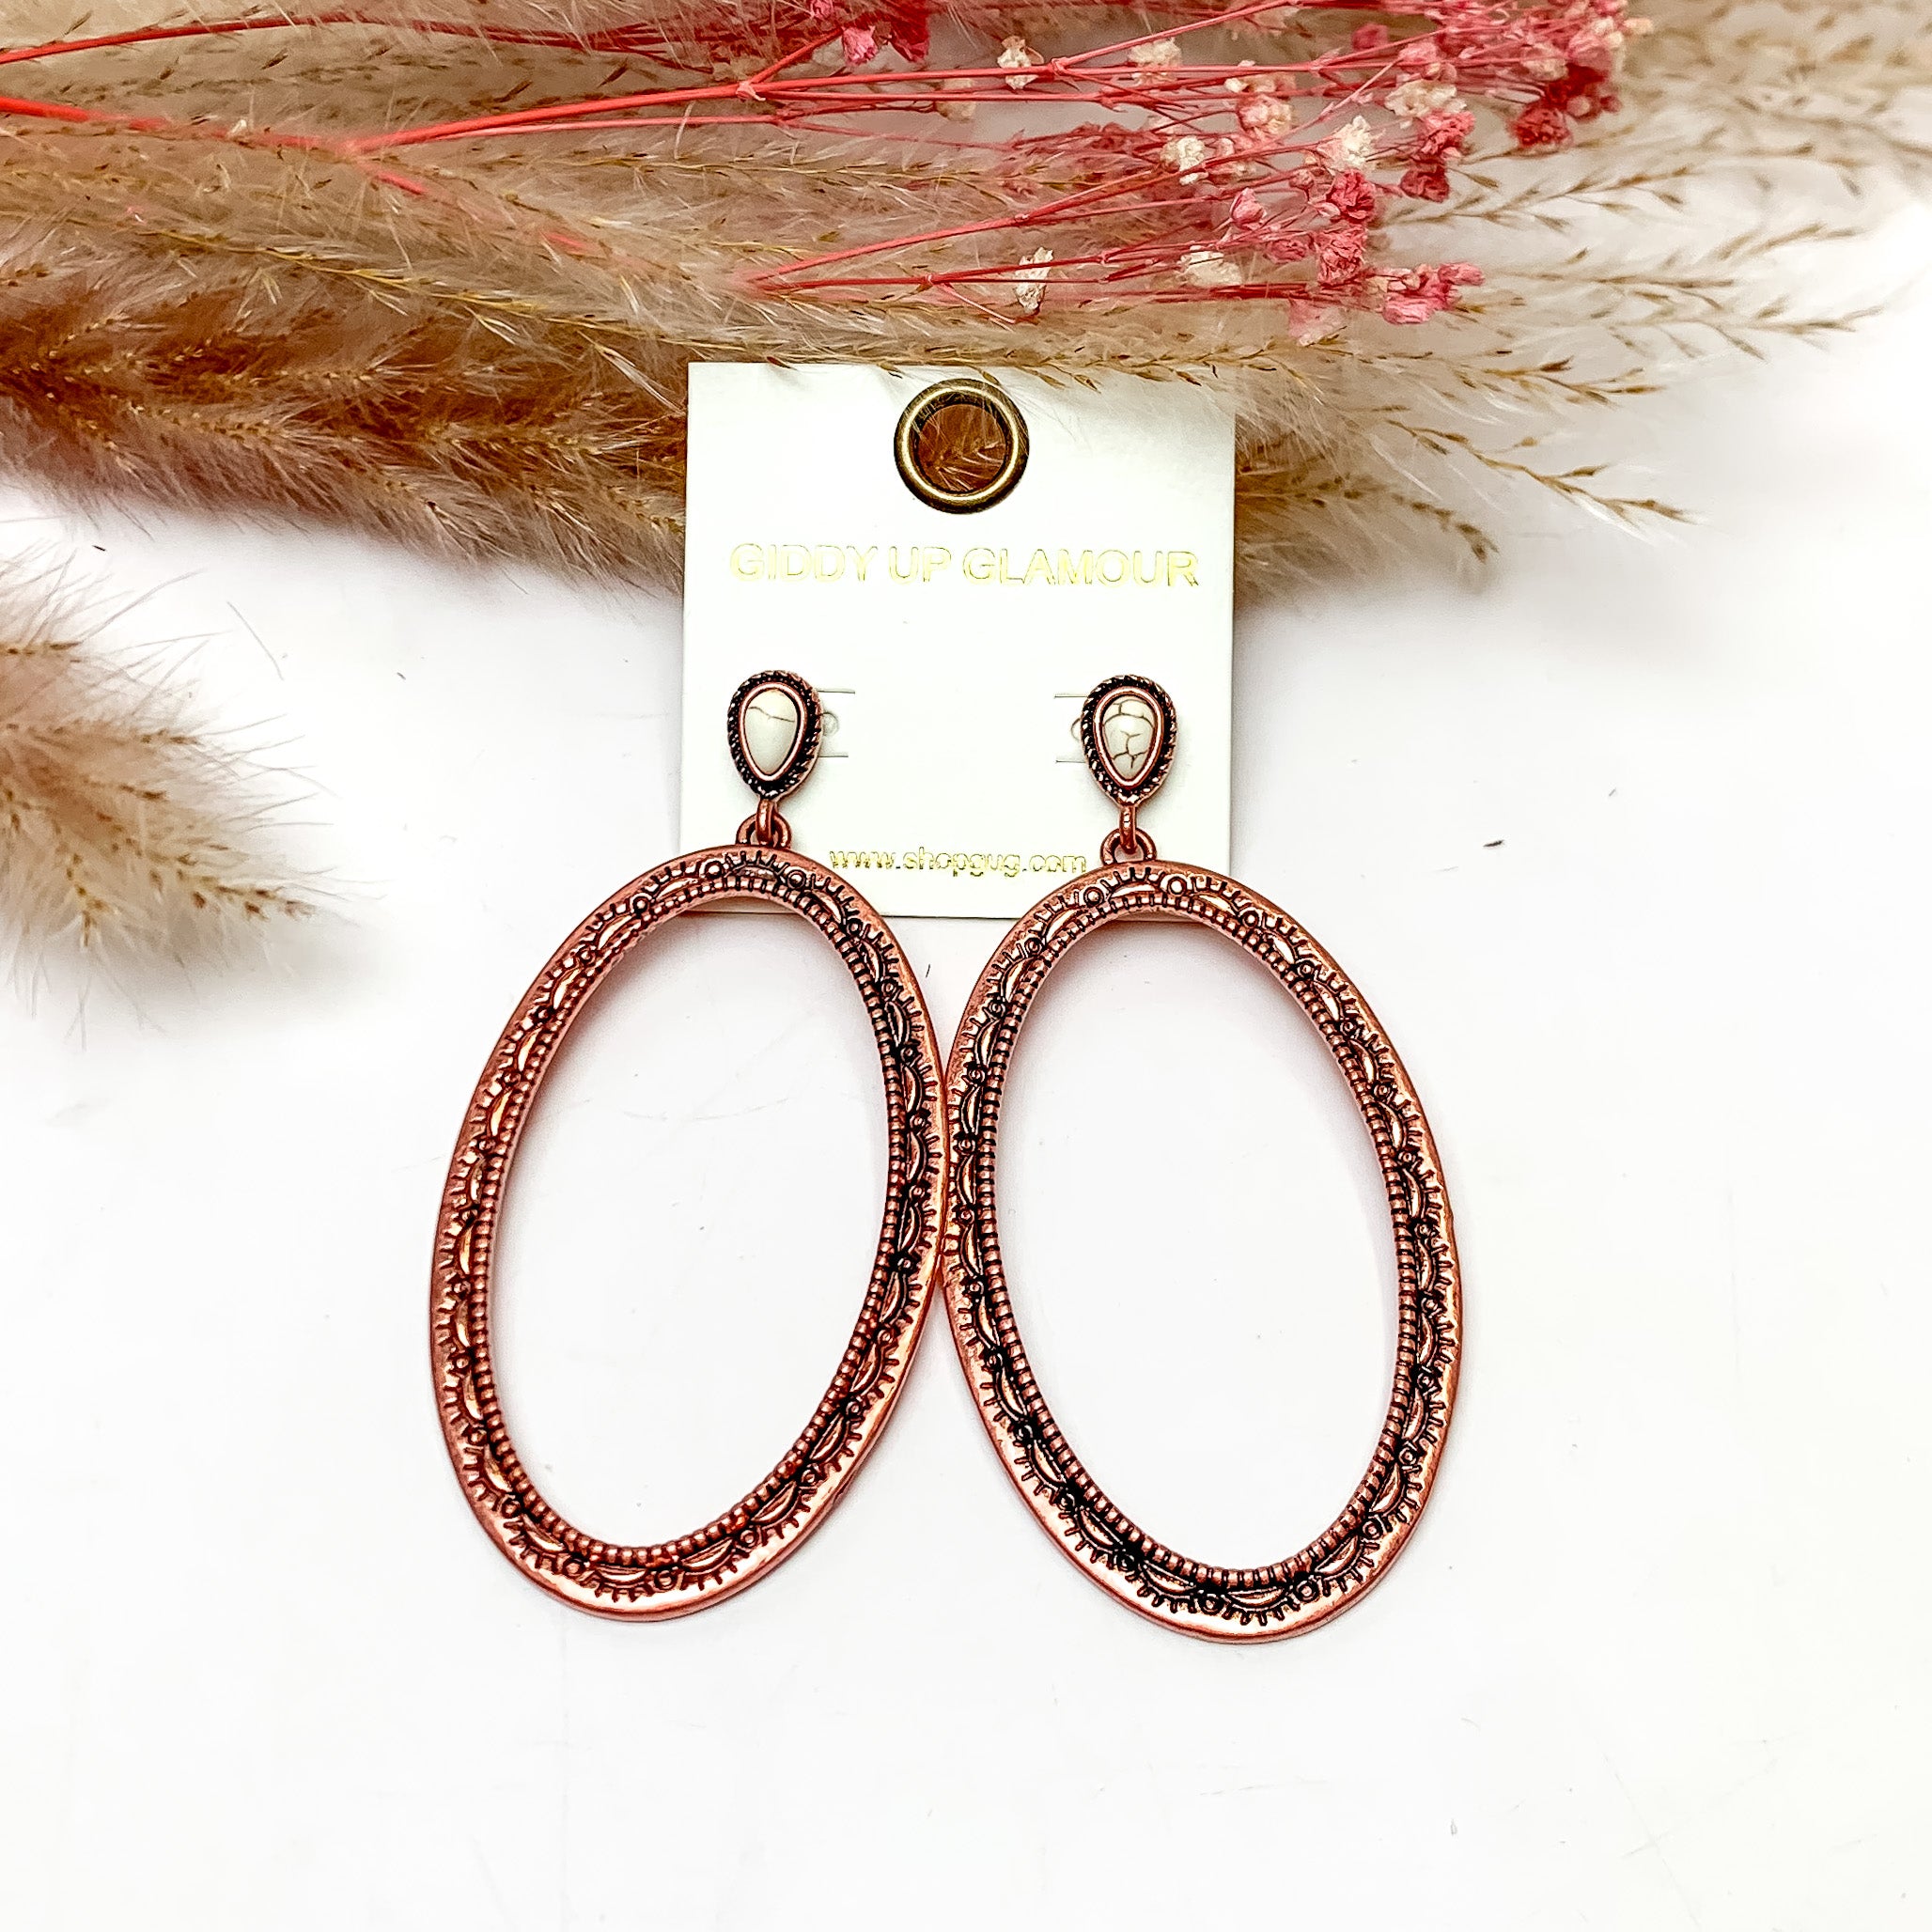 Oval Large Copper Tone Earrings With Ivory Posts. These earrings are pictured on a white background with plants behind for decoration.